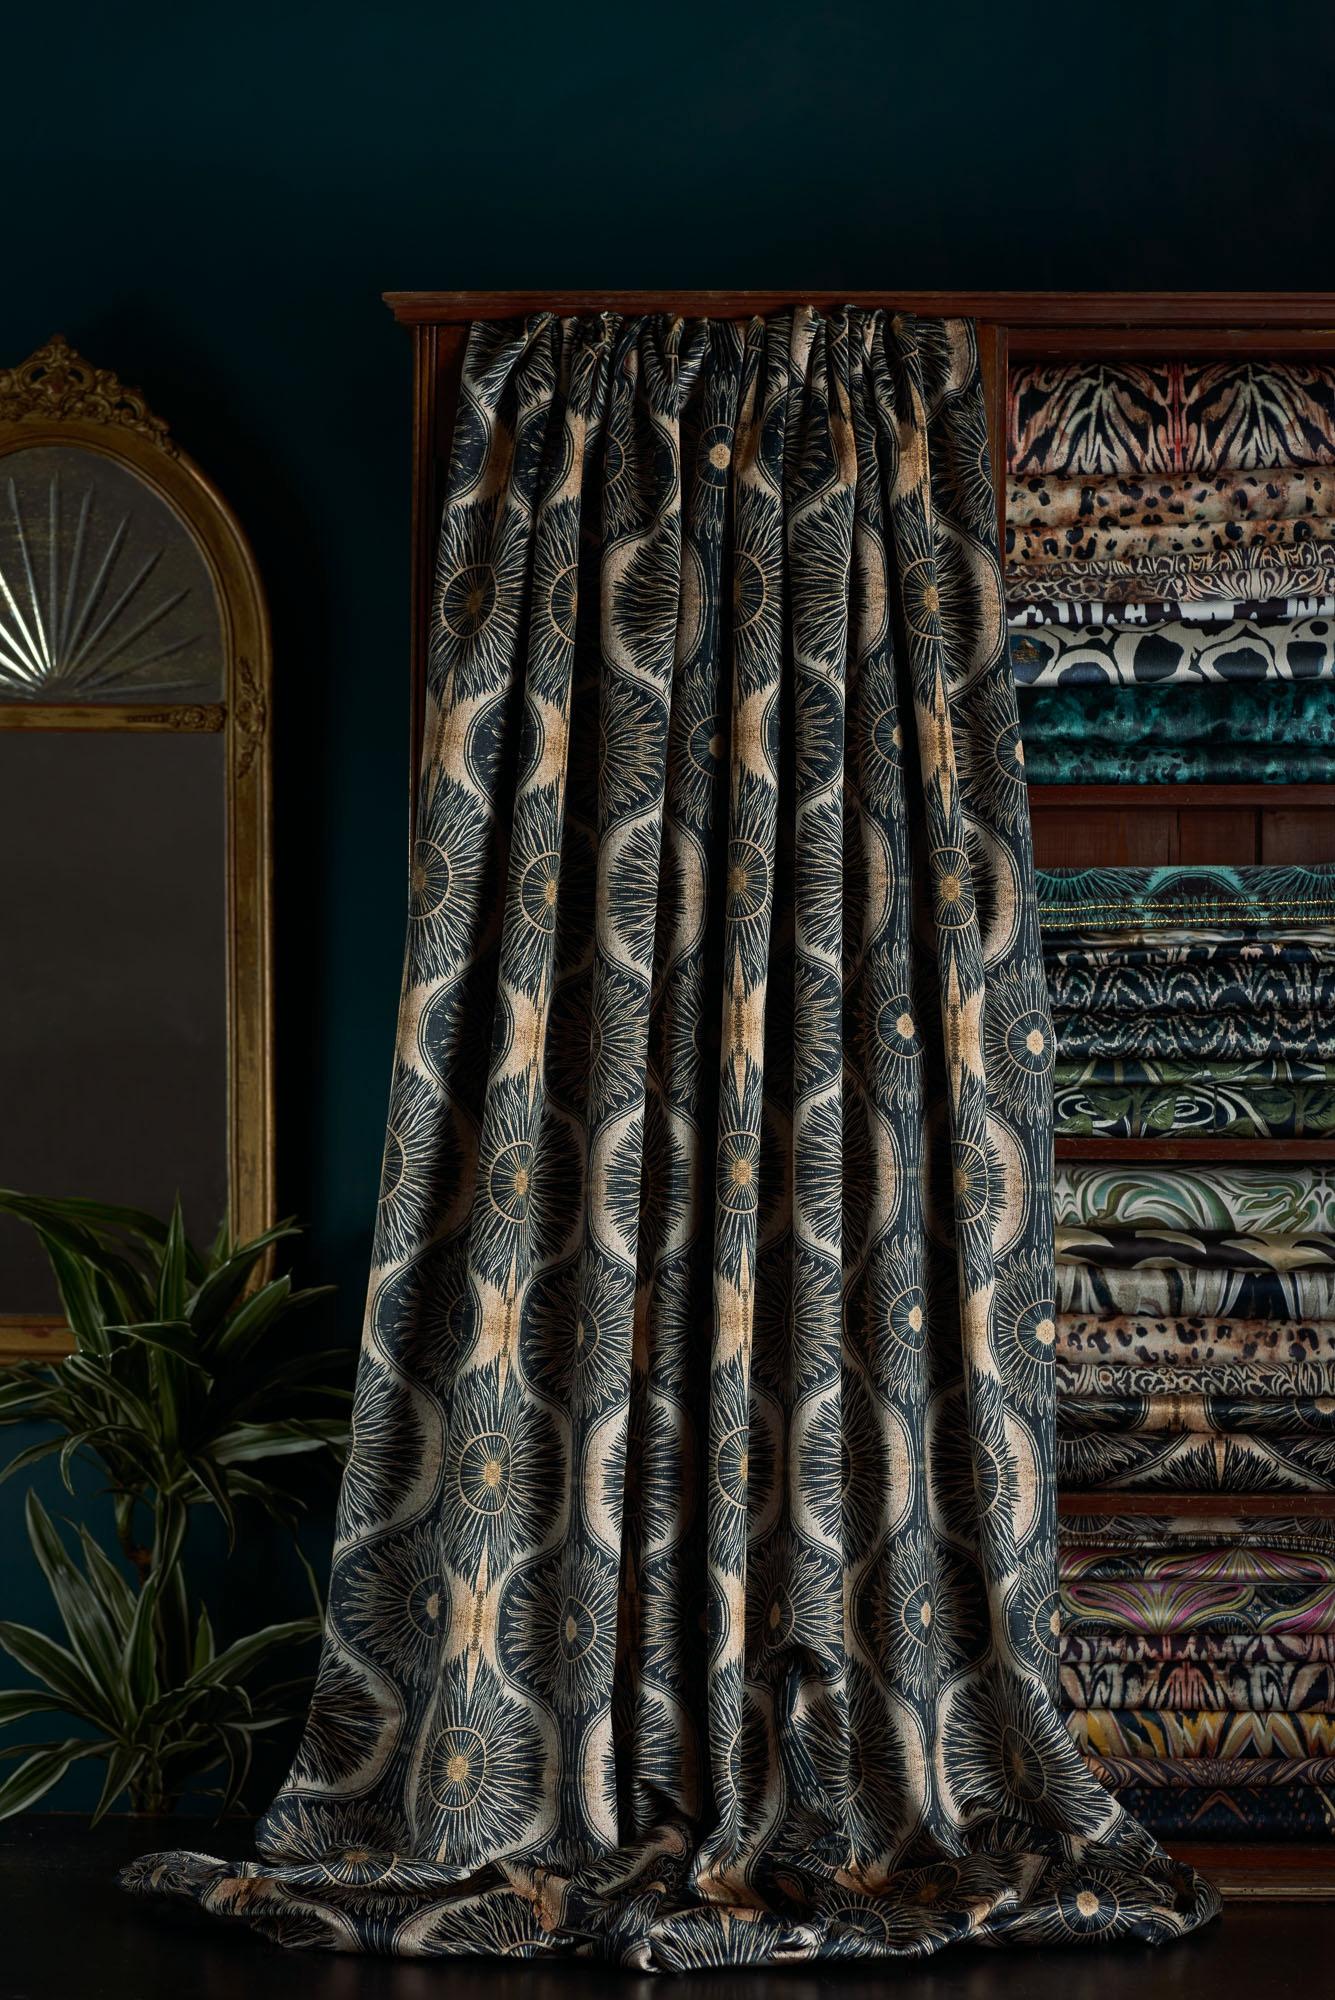 This is our most popular design – a linoprint transformed into a flowing pattern in black and soft gold tones. The metallic element of the original print transfers well on to this velvet giving a soft sheen.

This velvet is midweight, with a strong